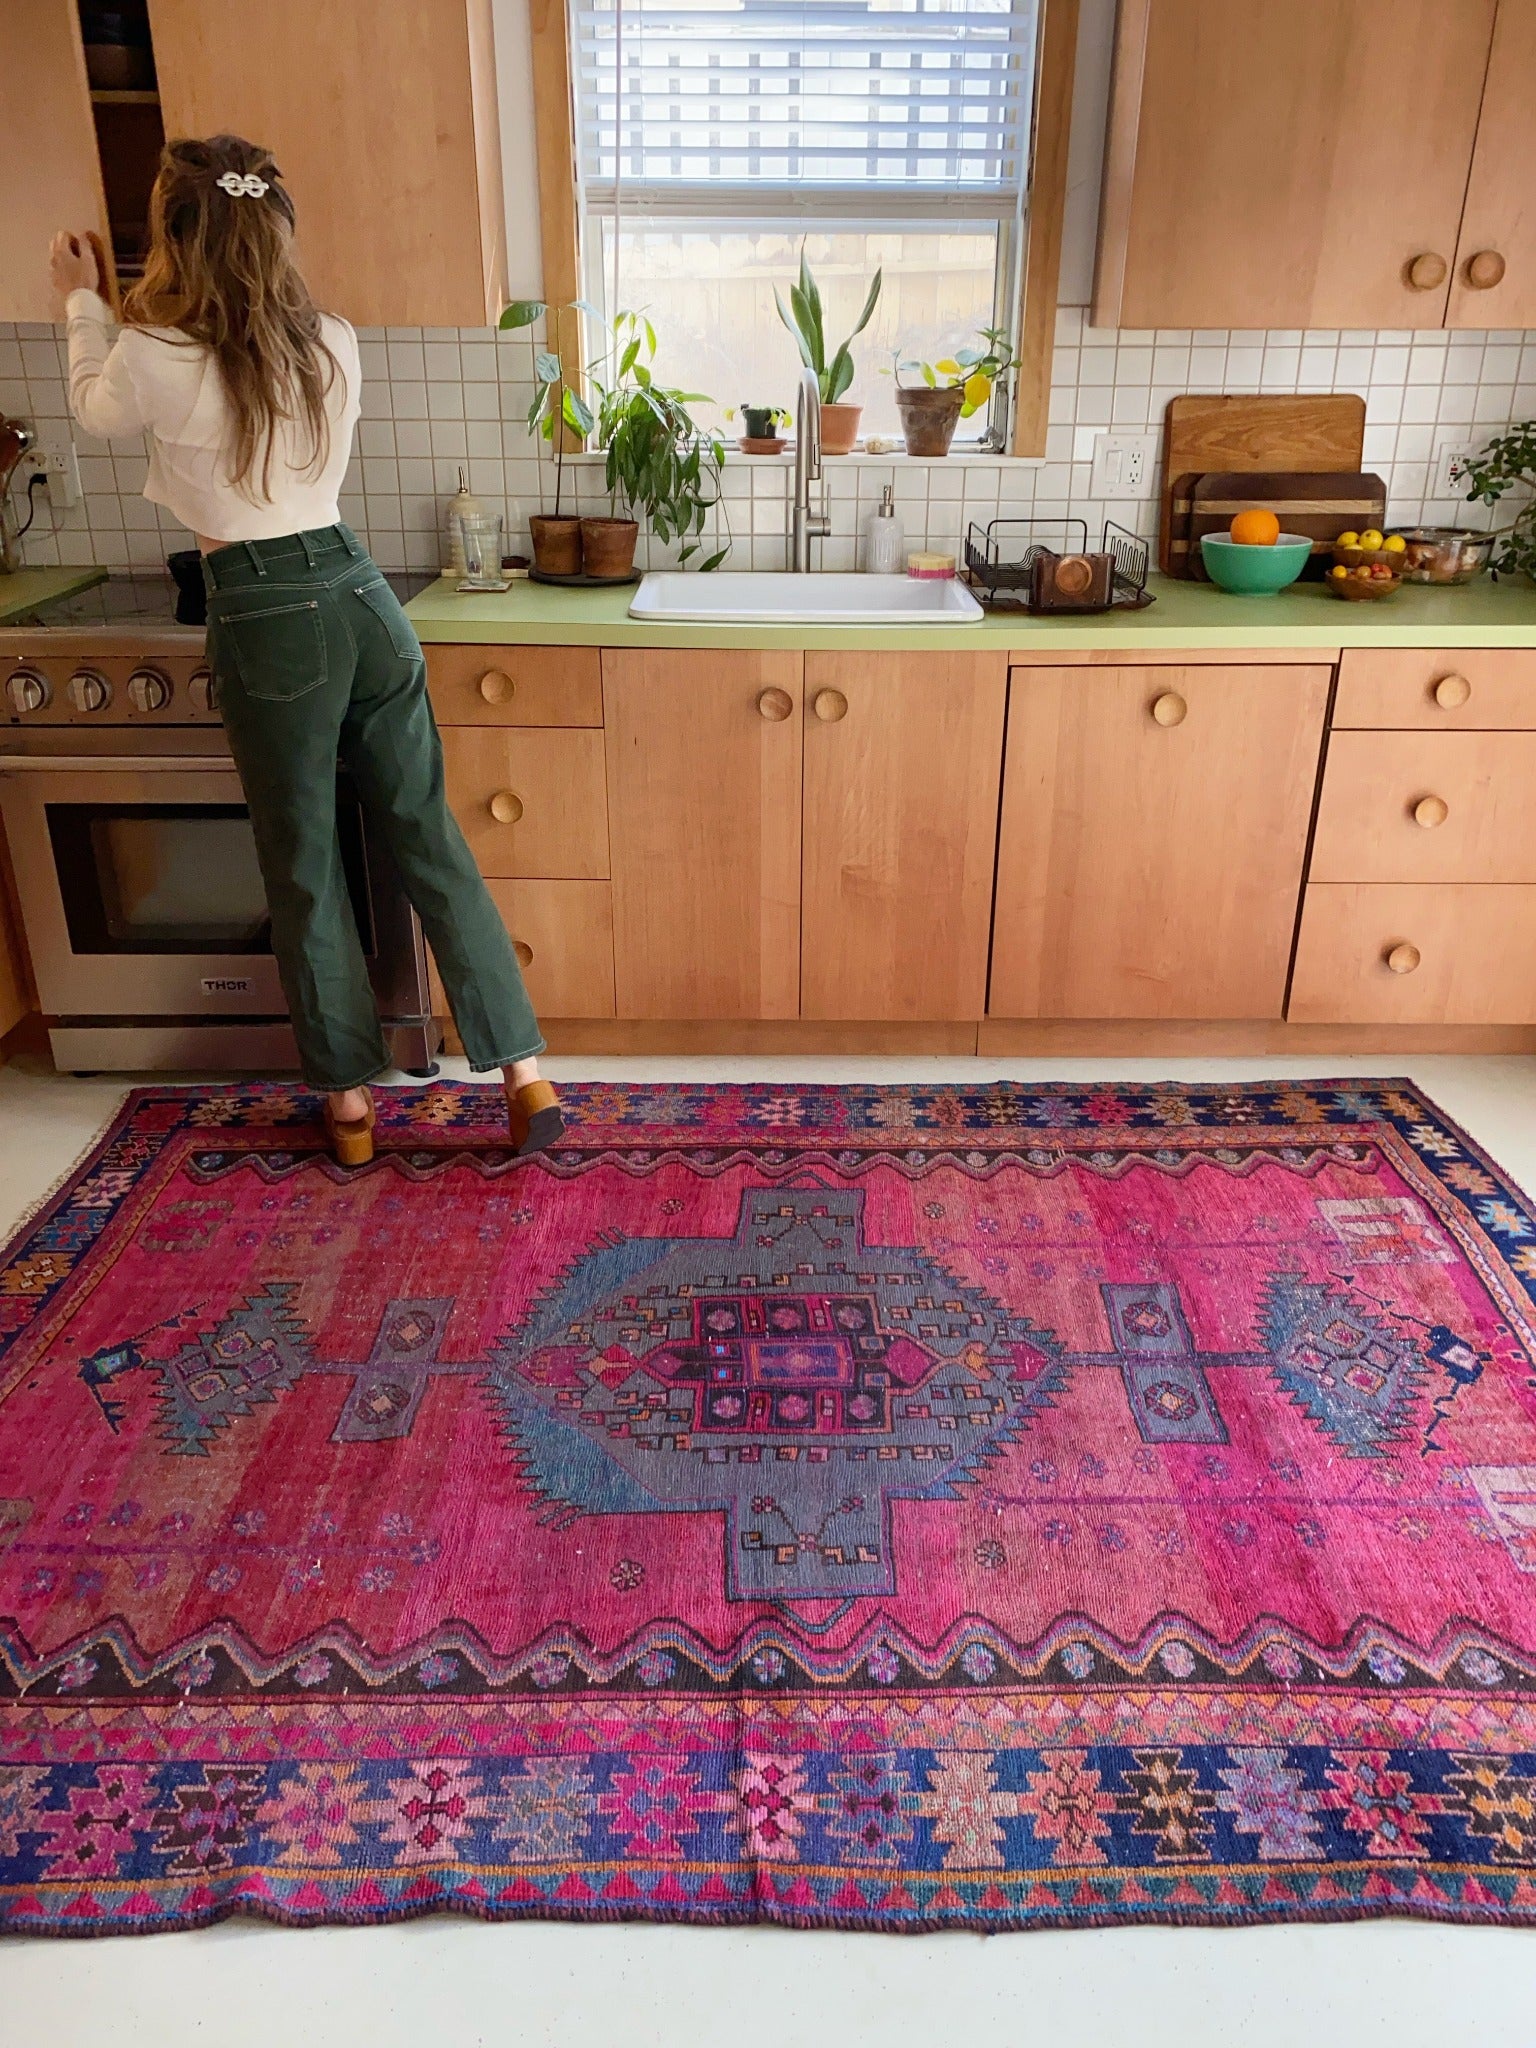 Style Pentas Persian Rug in the Kitchen